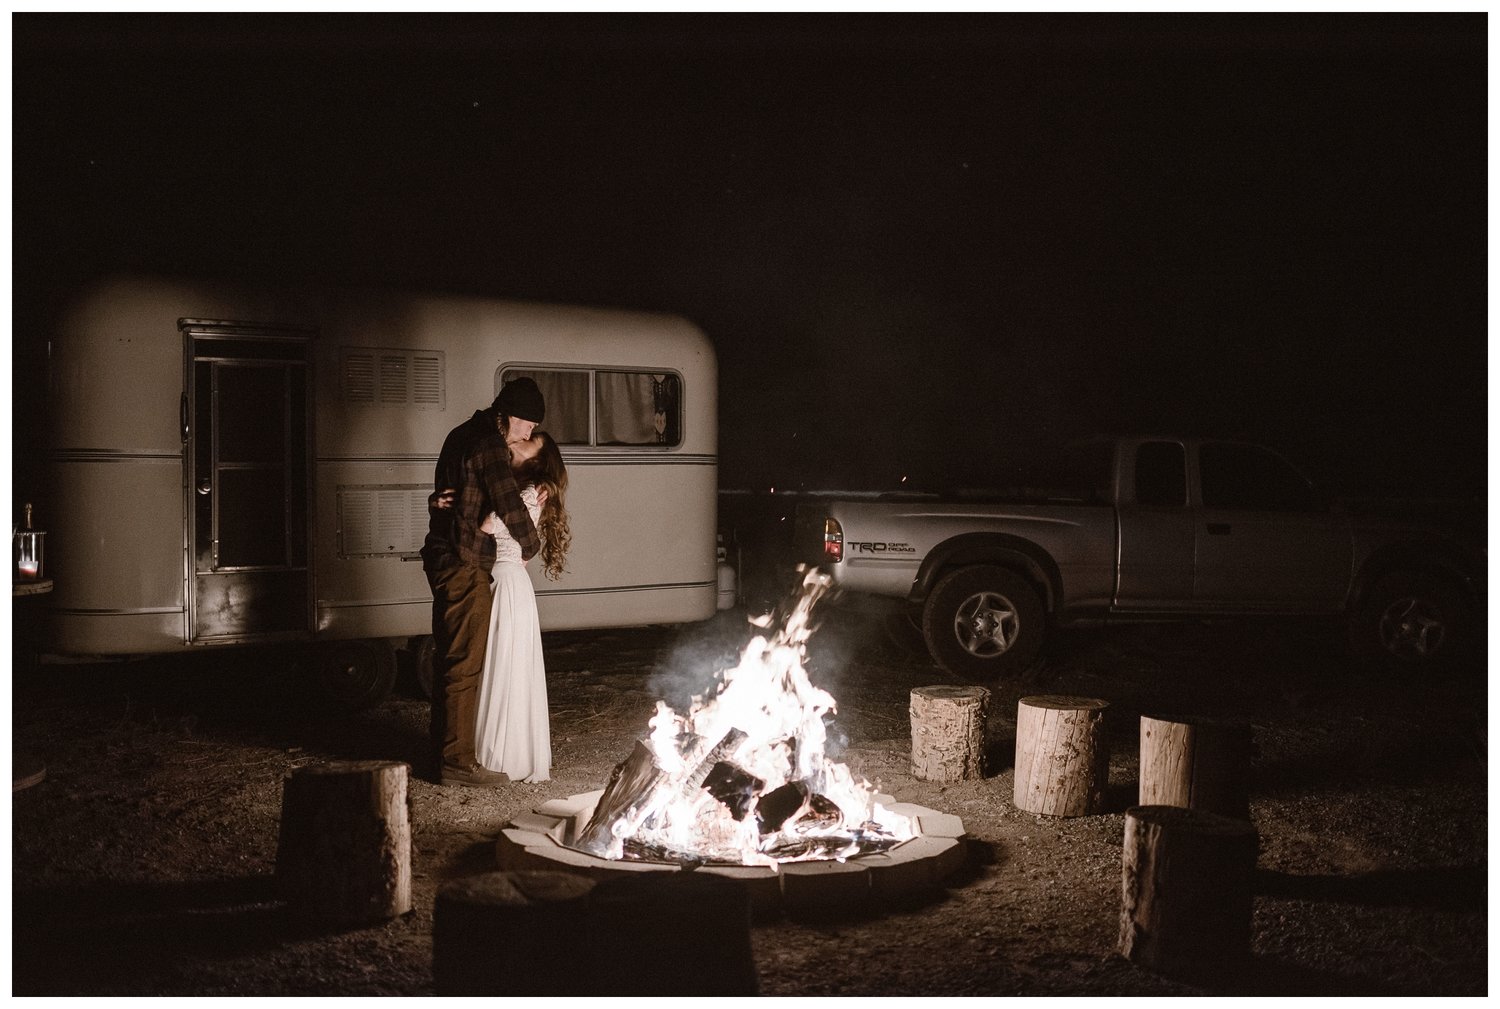 Bride and groom kiss with bonfire in foreground and camper in background. 